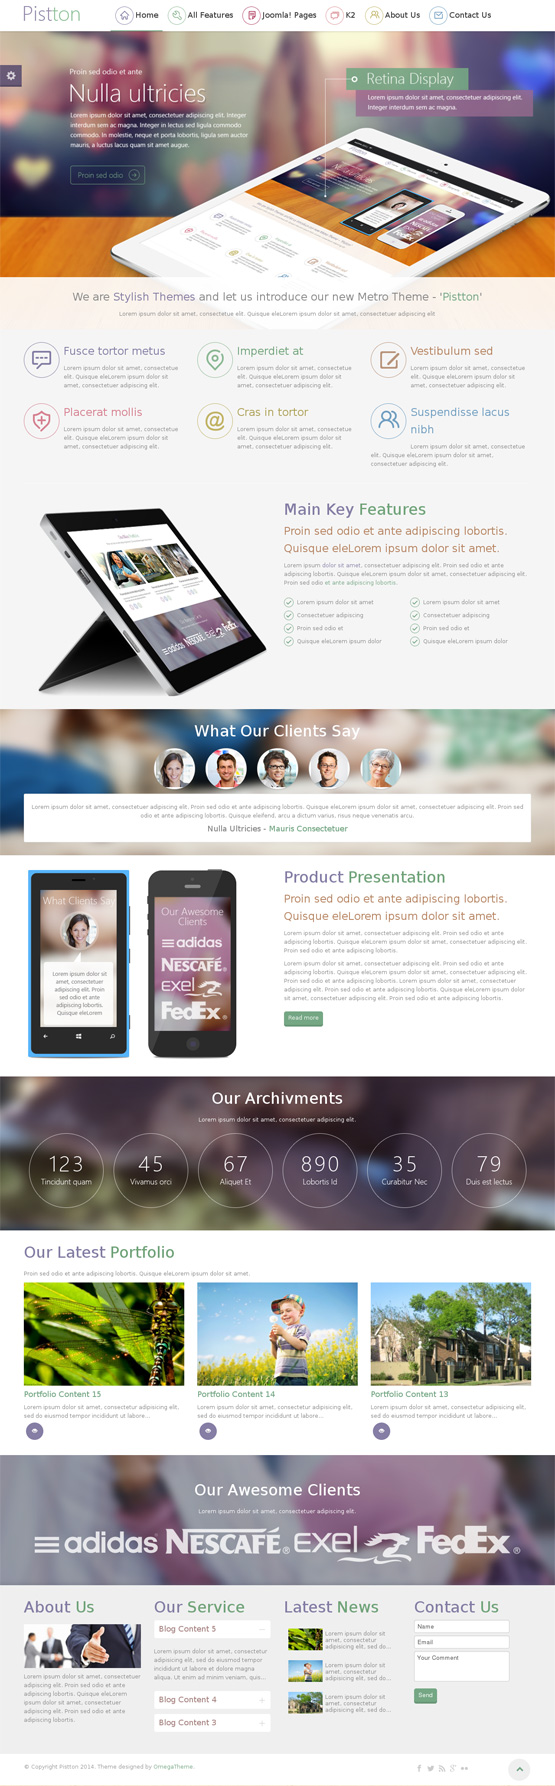 pistton home page template 